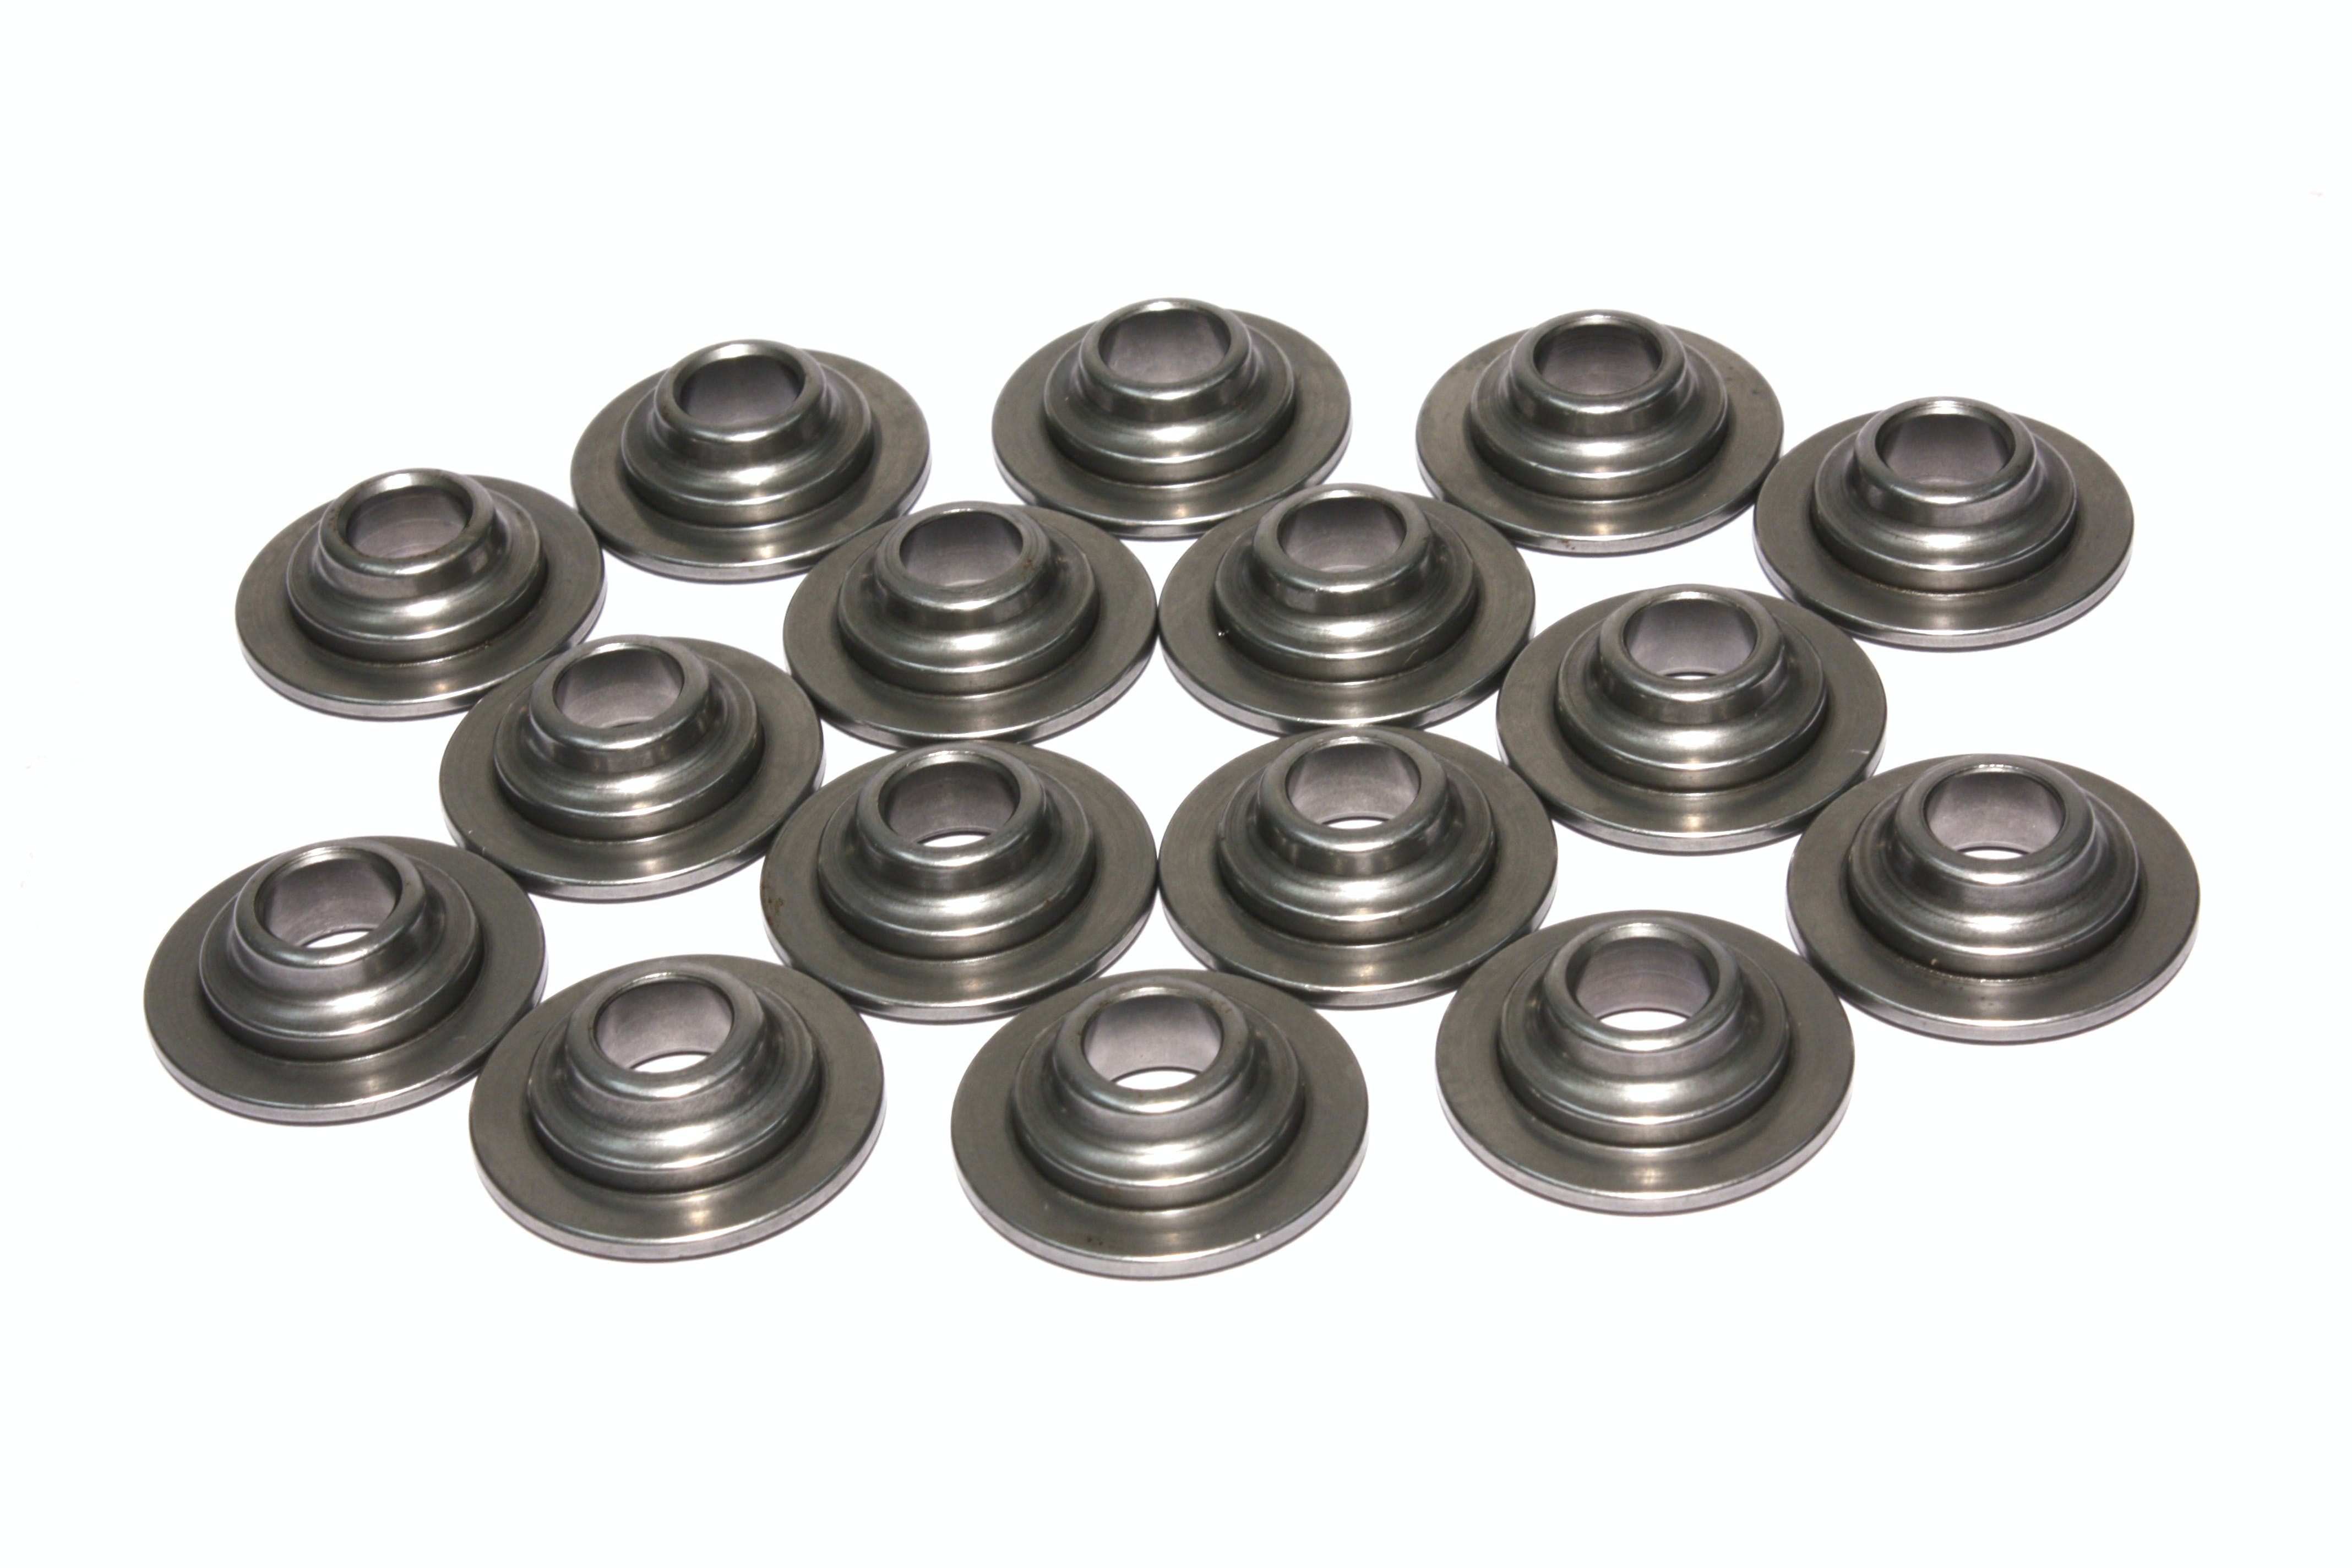 Competition Cams 1757-16 7 Tool Steel Retainer Set of 16, 7mm Valve for 26056 Spring